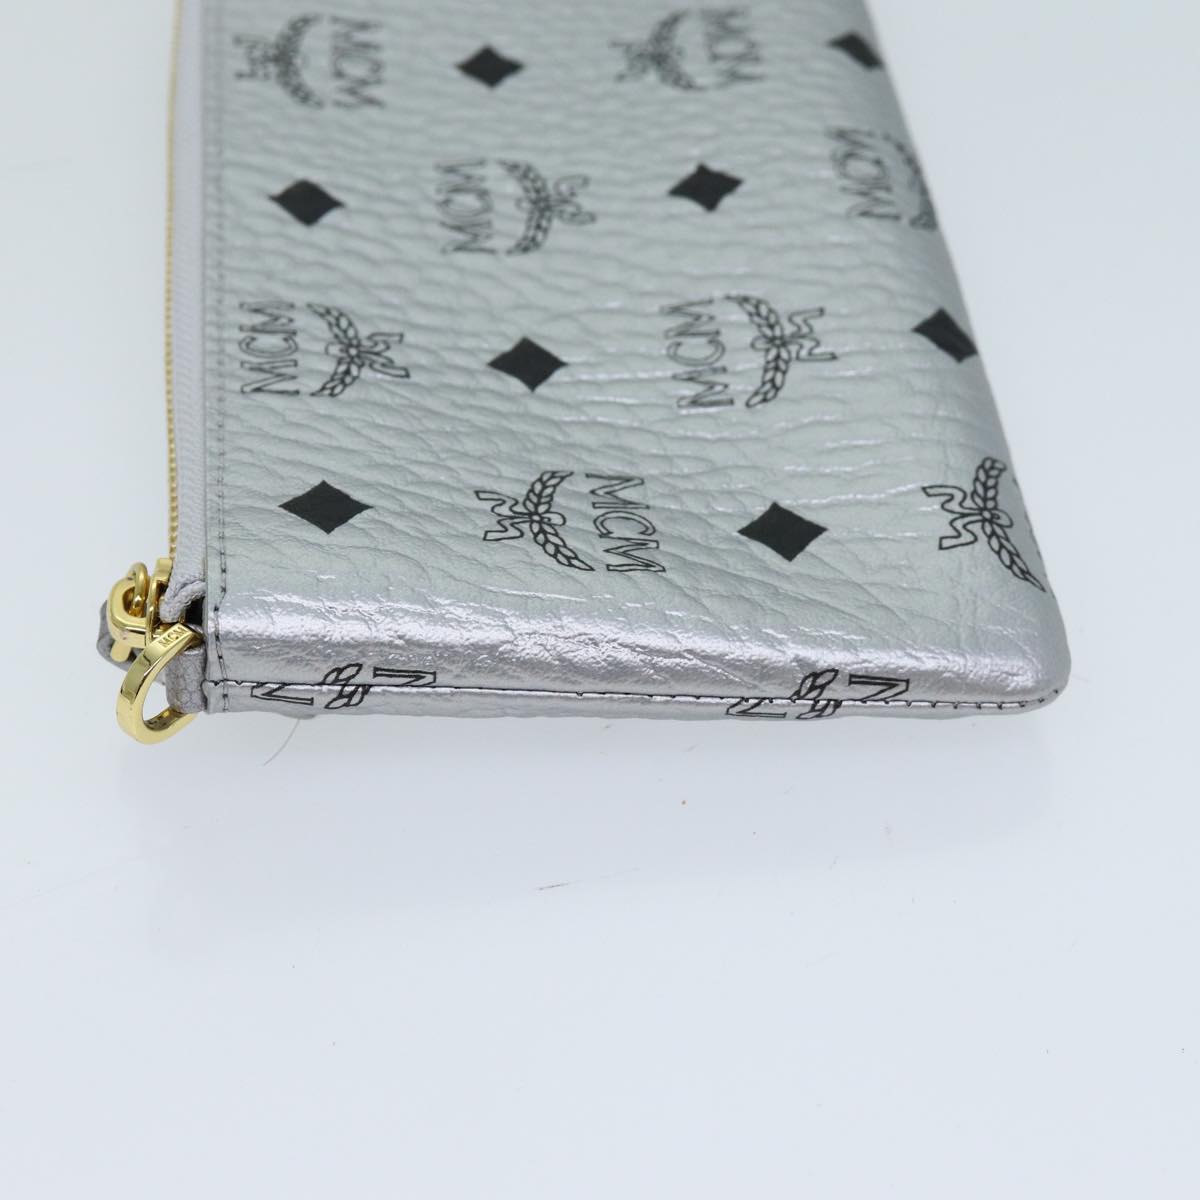 MCM Vicetos Logogram Accessory Pouch PVC Silver Auth 69723A